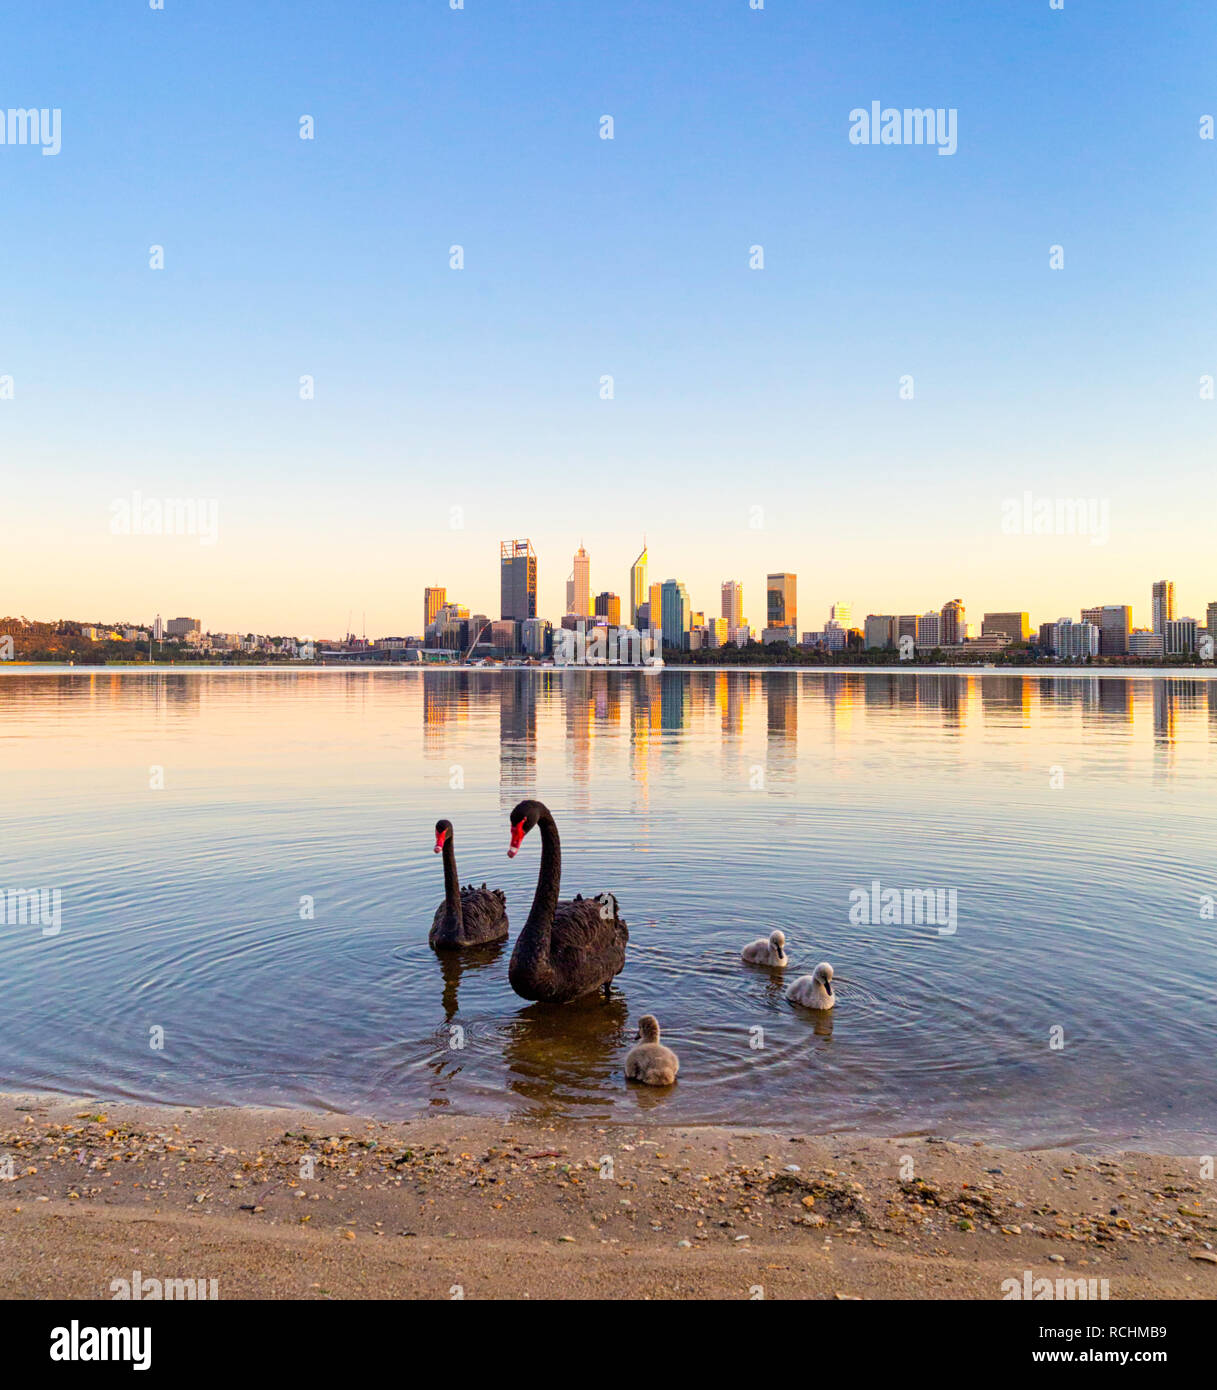 Perth, Western Australia. Two black swans - Cygnus atratus - and their cygnets on the shores of the Swan River in South Perth Stock Photo